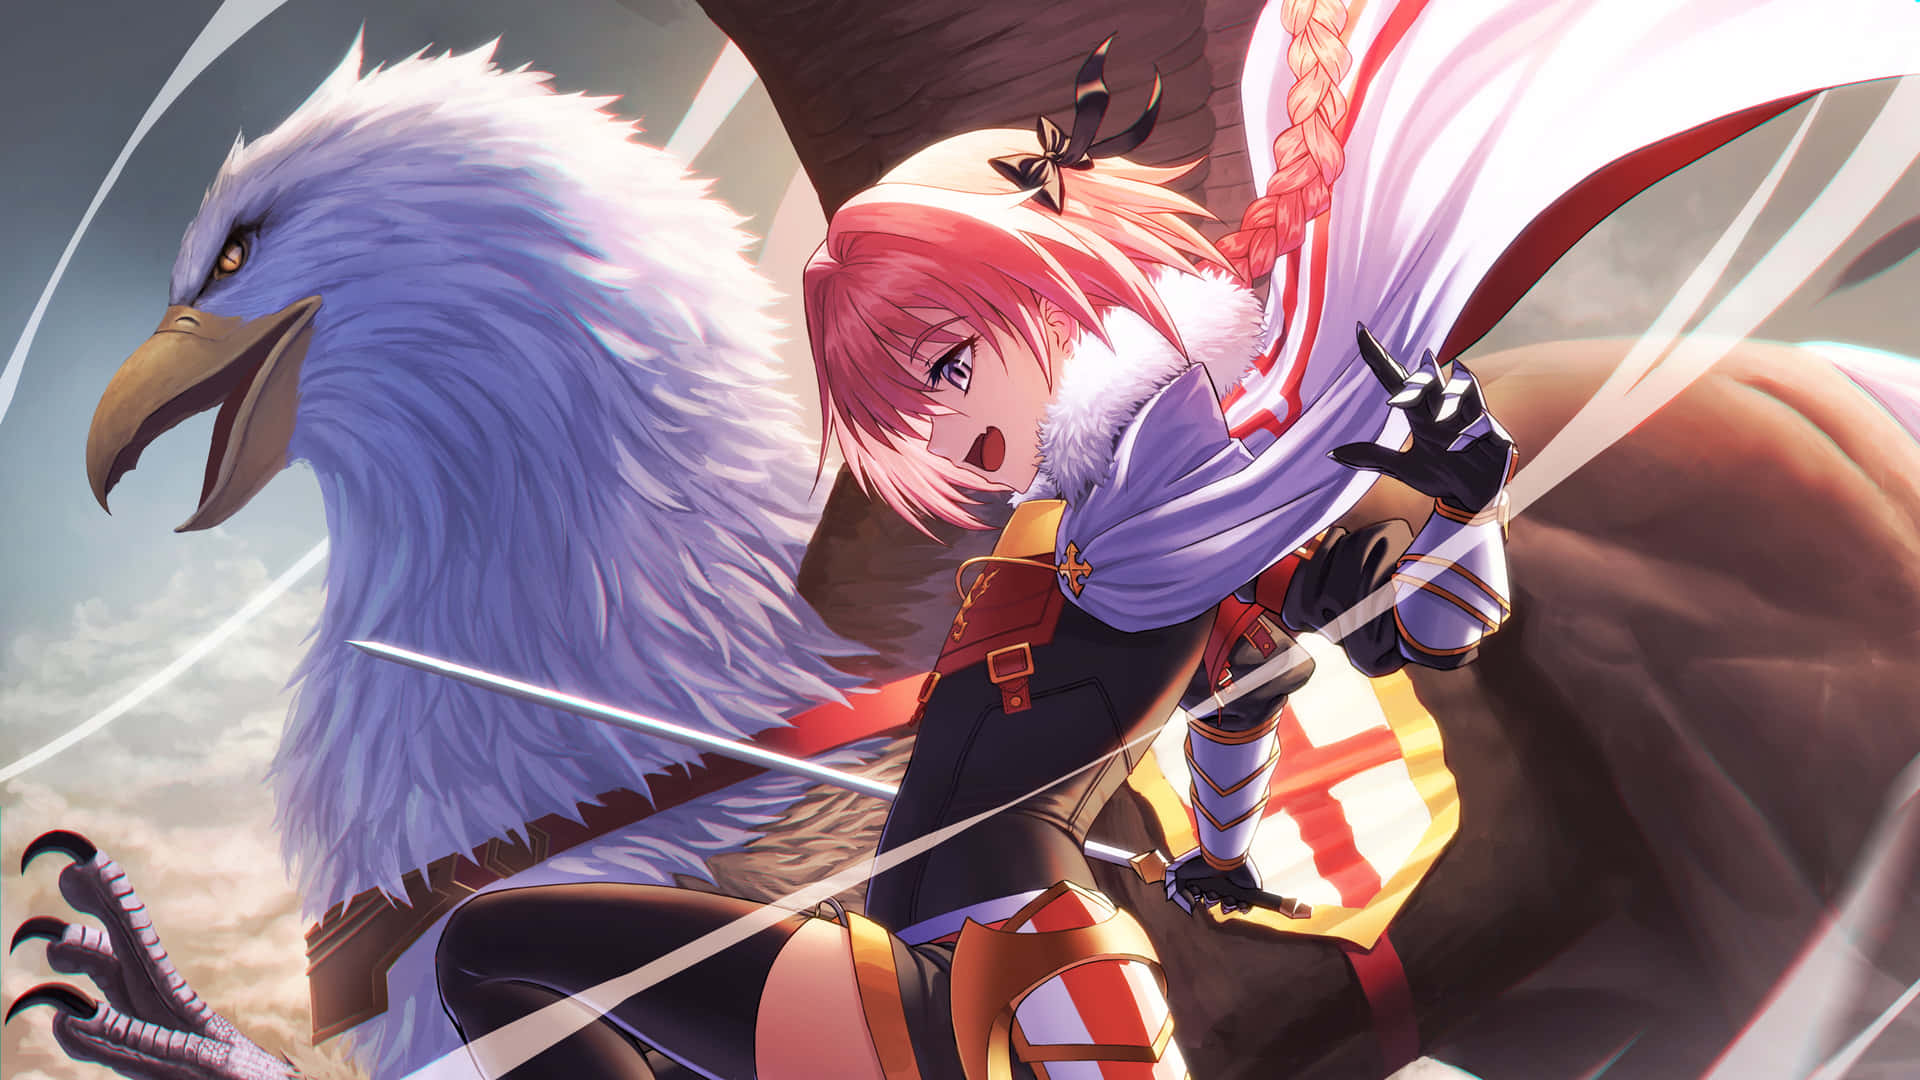 Explore the wondrous world of Astolfo with this stunning background!